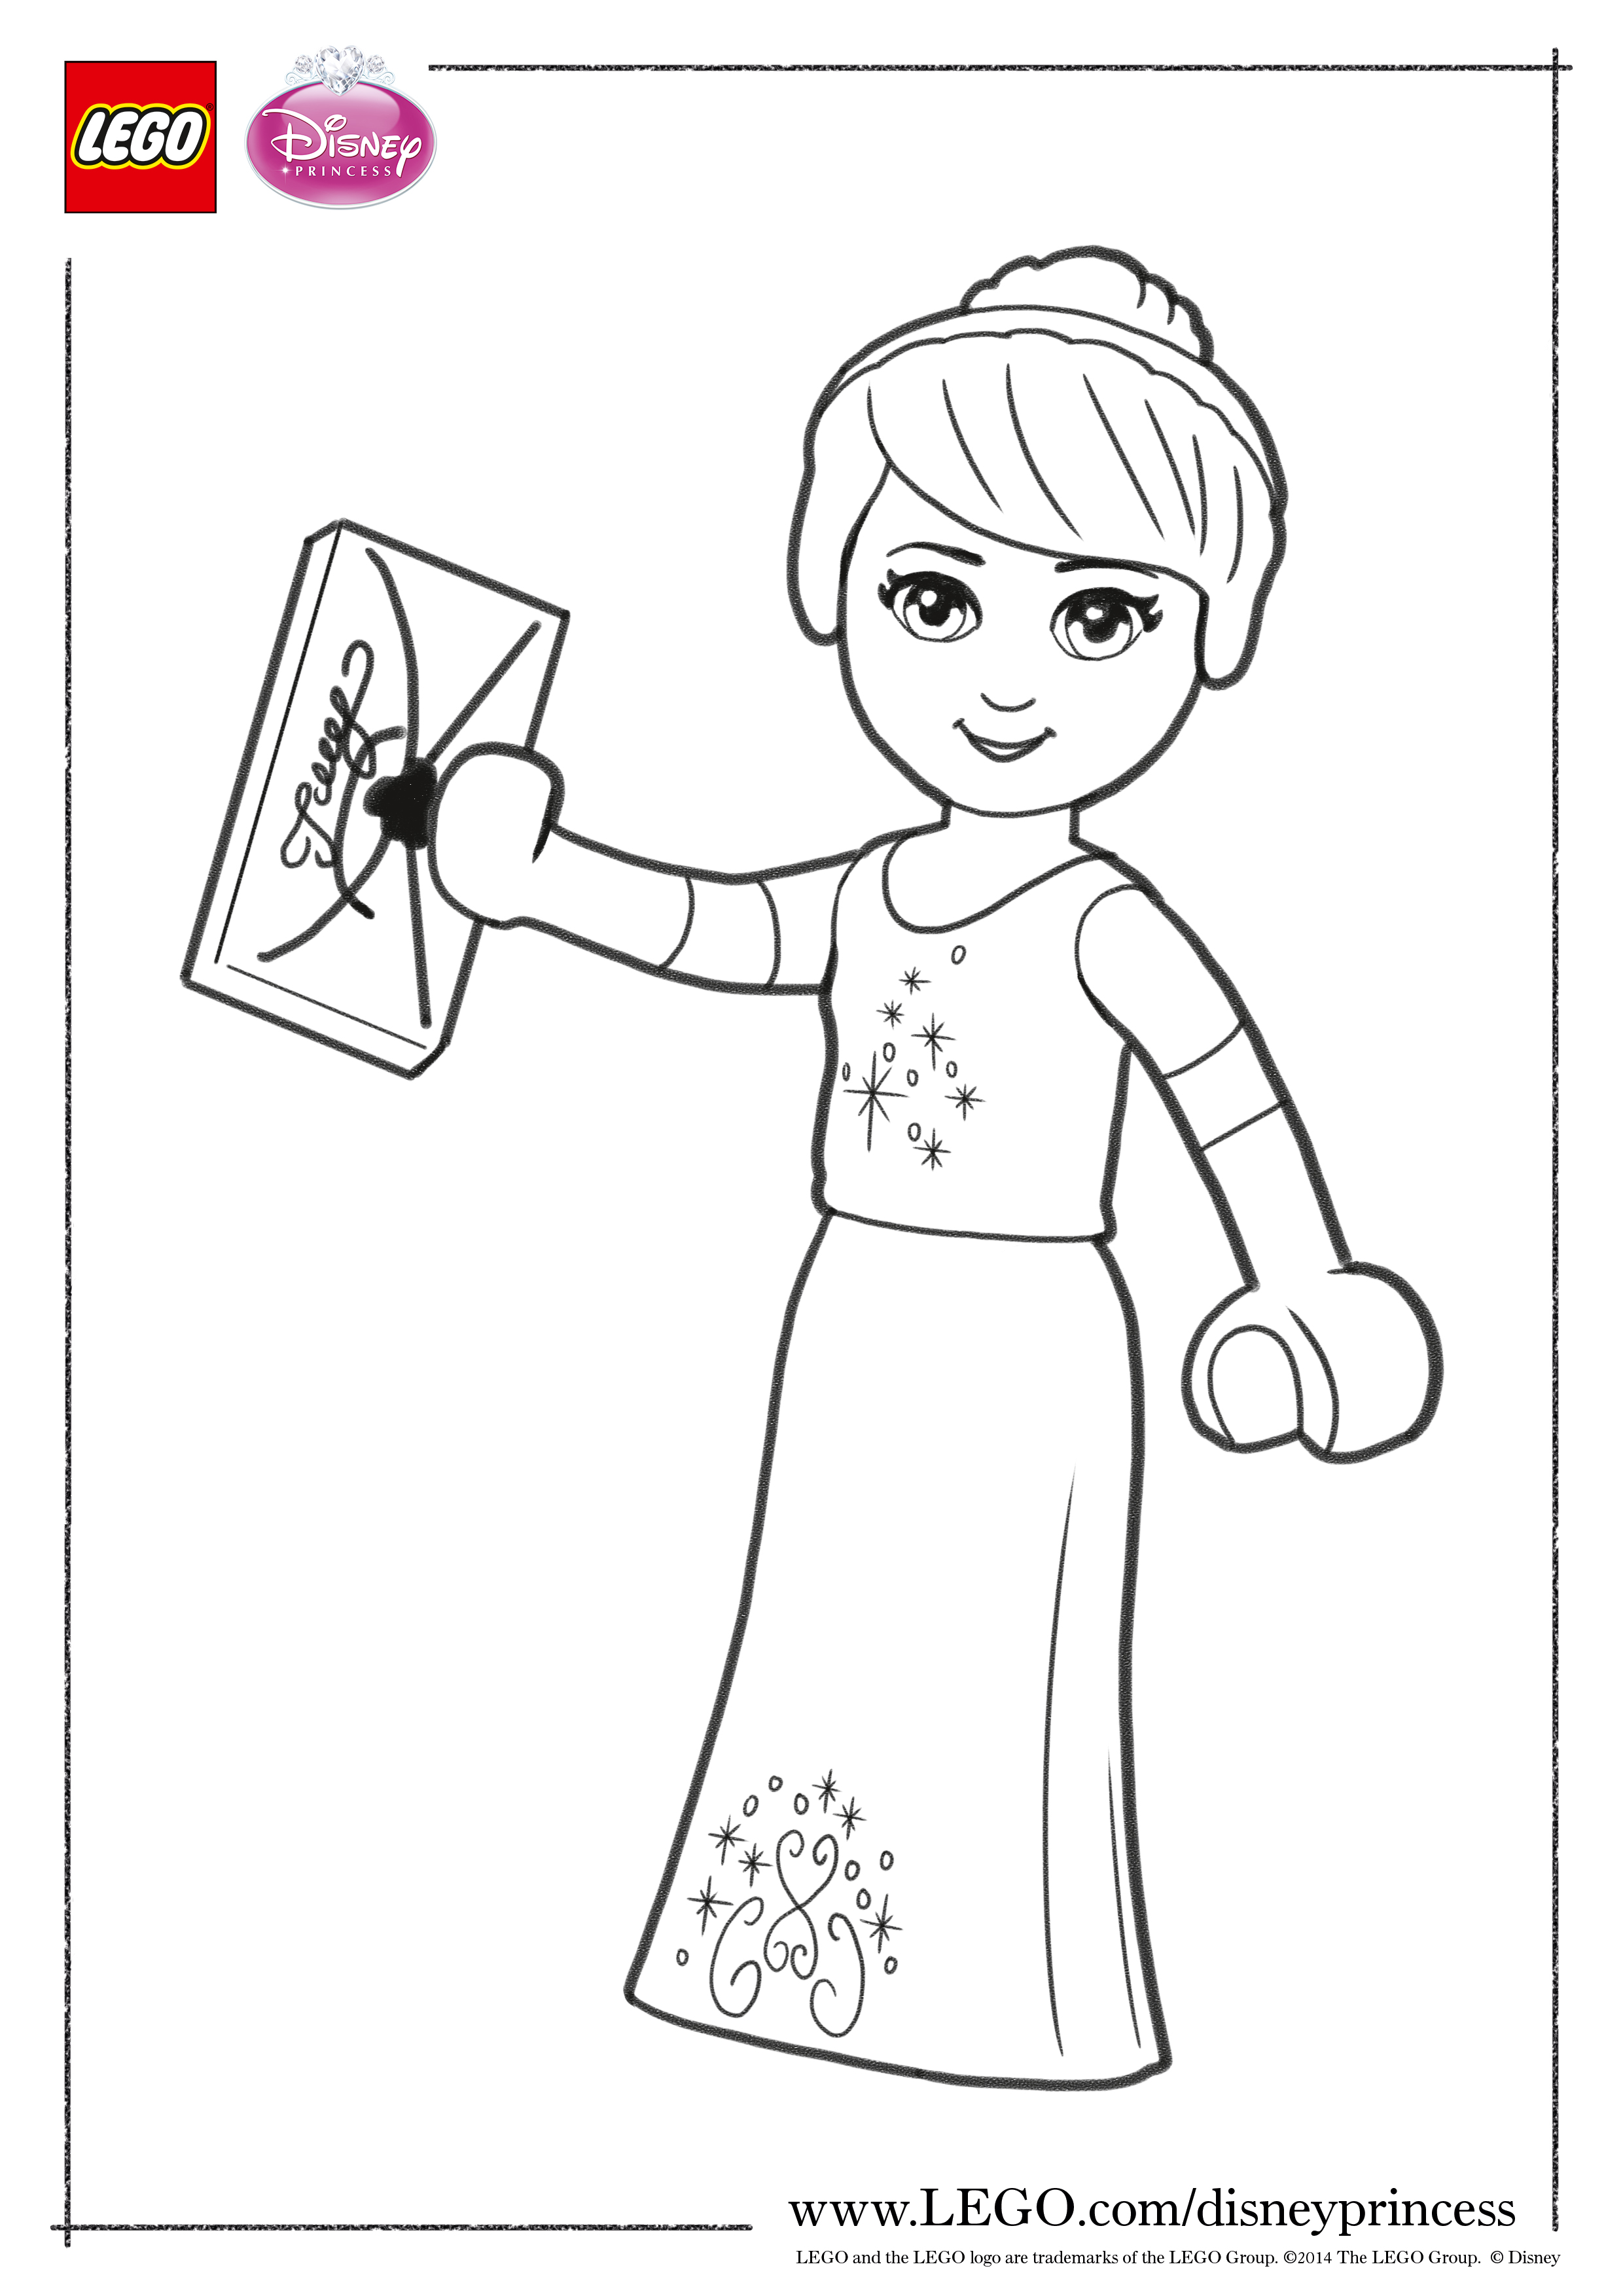 176 Simple Lego Princess Coloring Pages for Kids